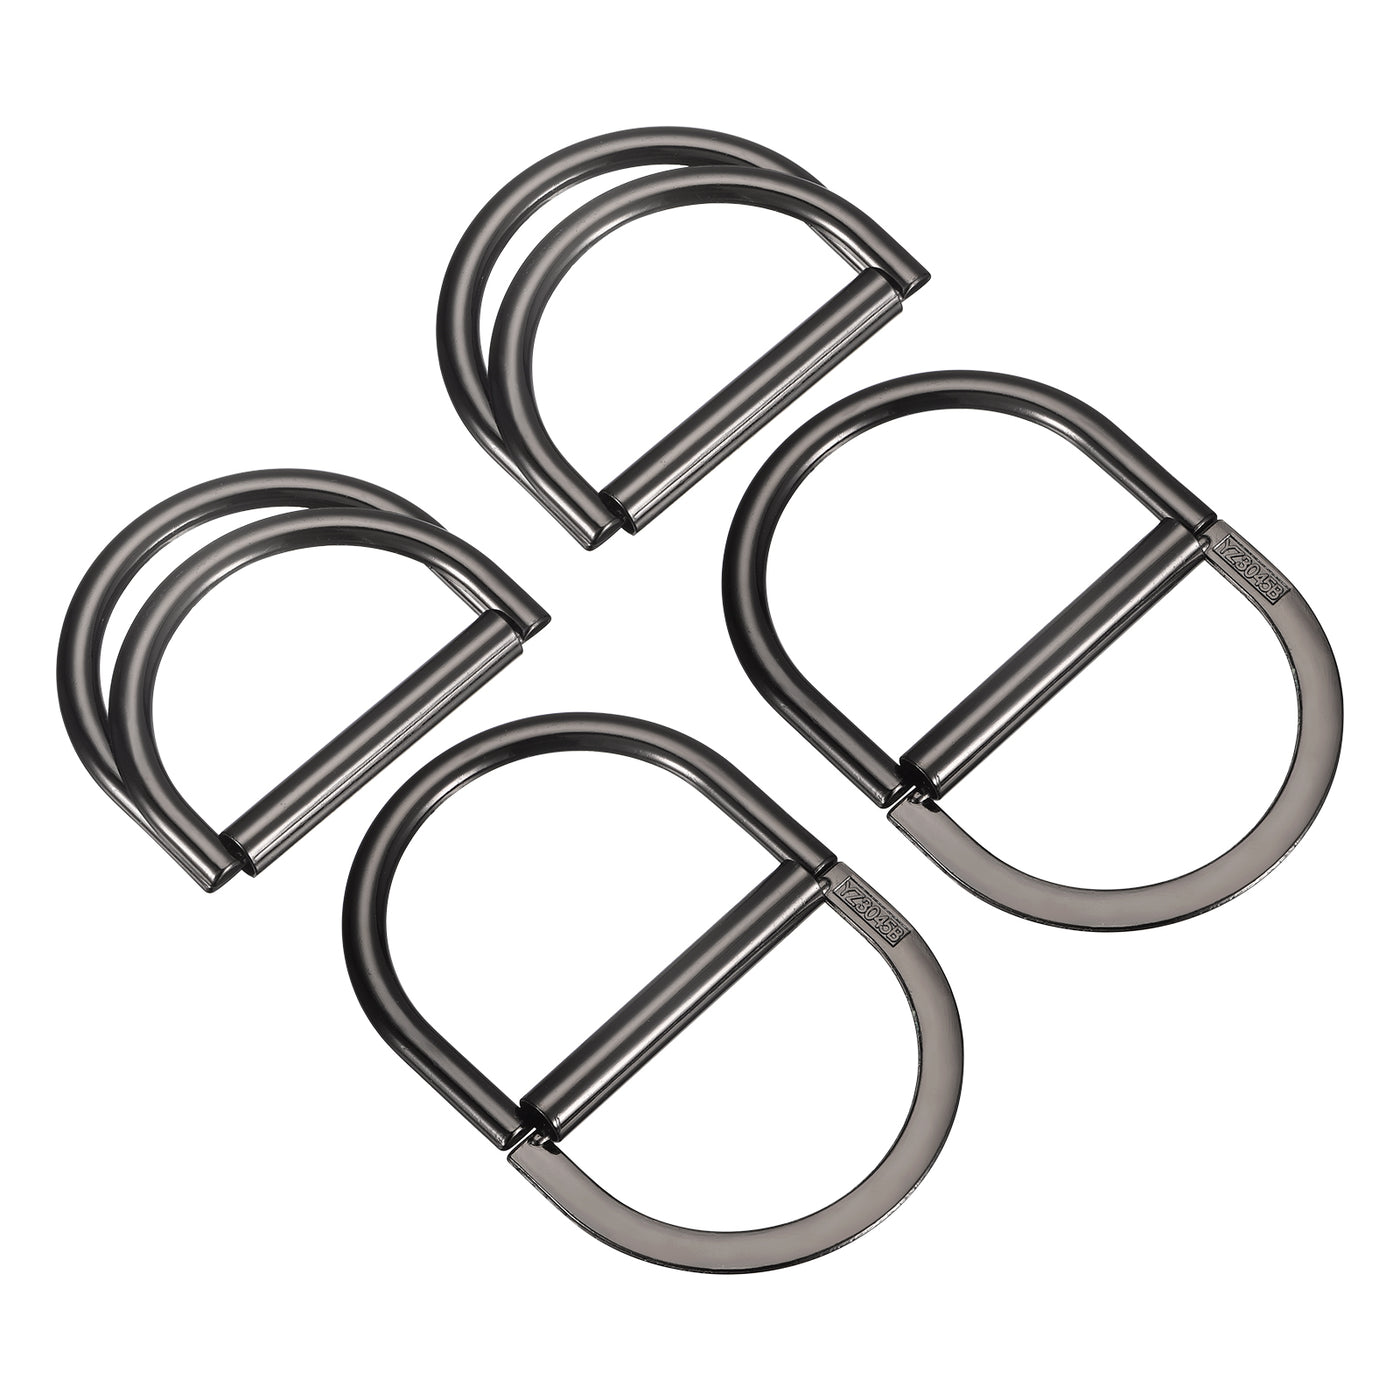 uxcell Uxcell Double D-Ring Buckles, Adjustable Multi-Purpose D Rings for Clothing Waistband Dress Straps Bags